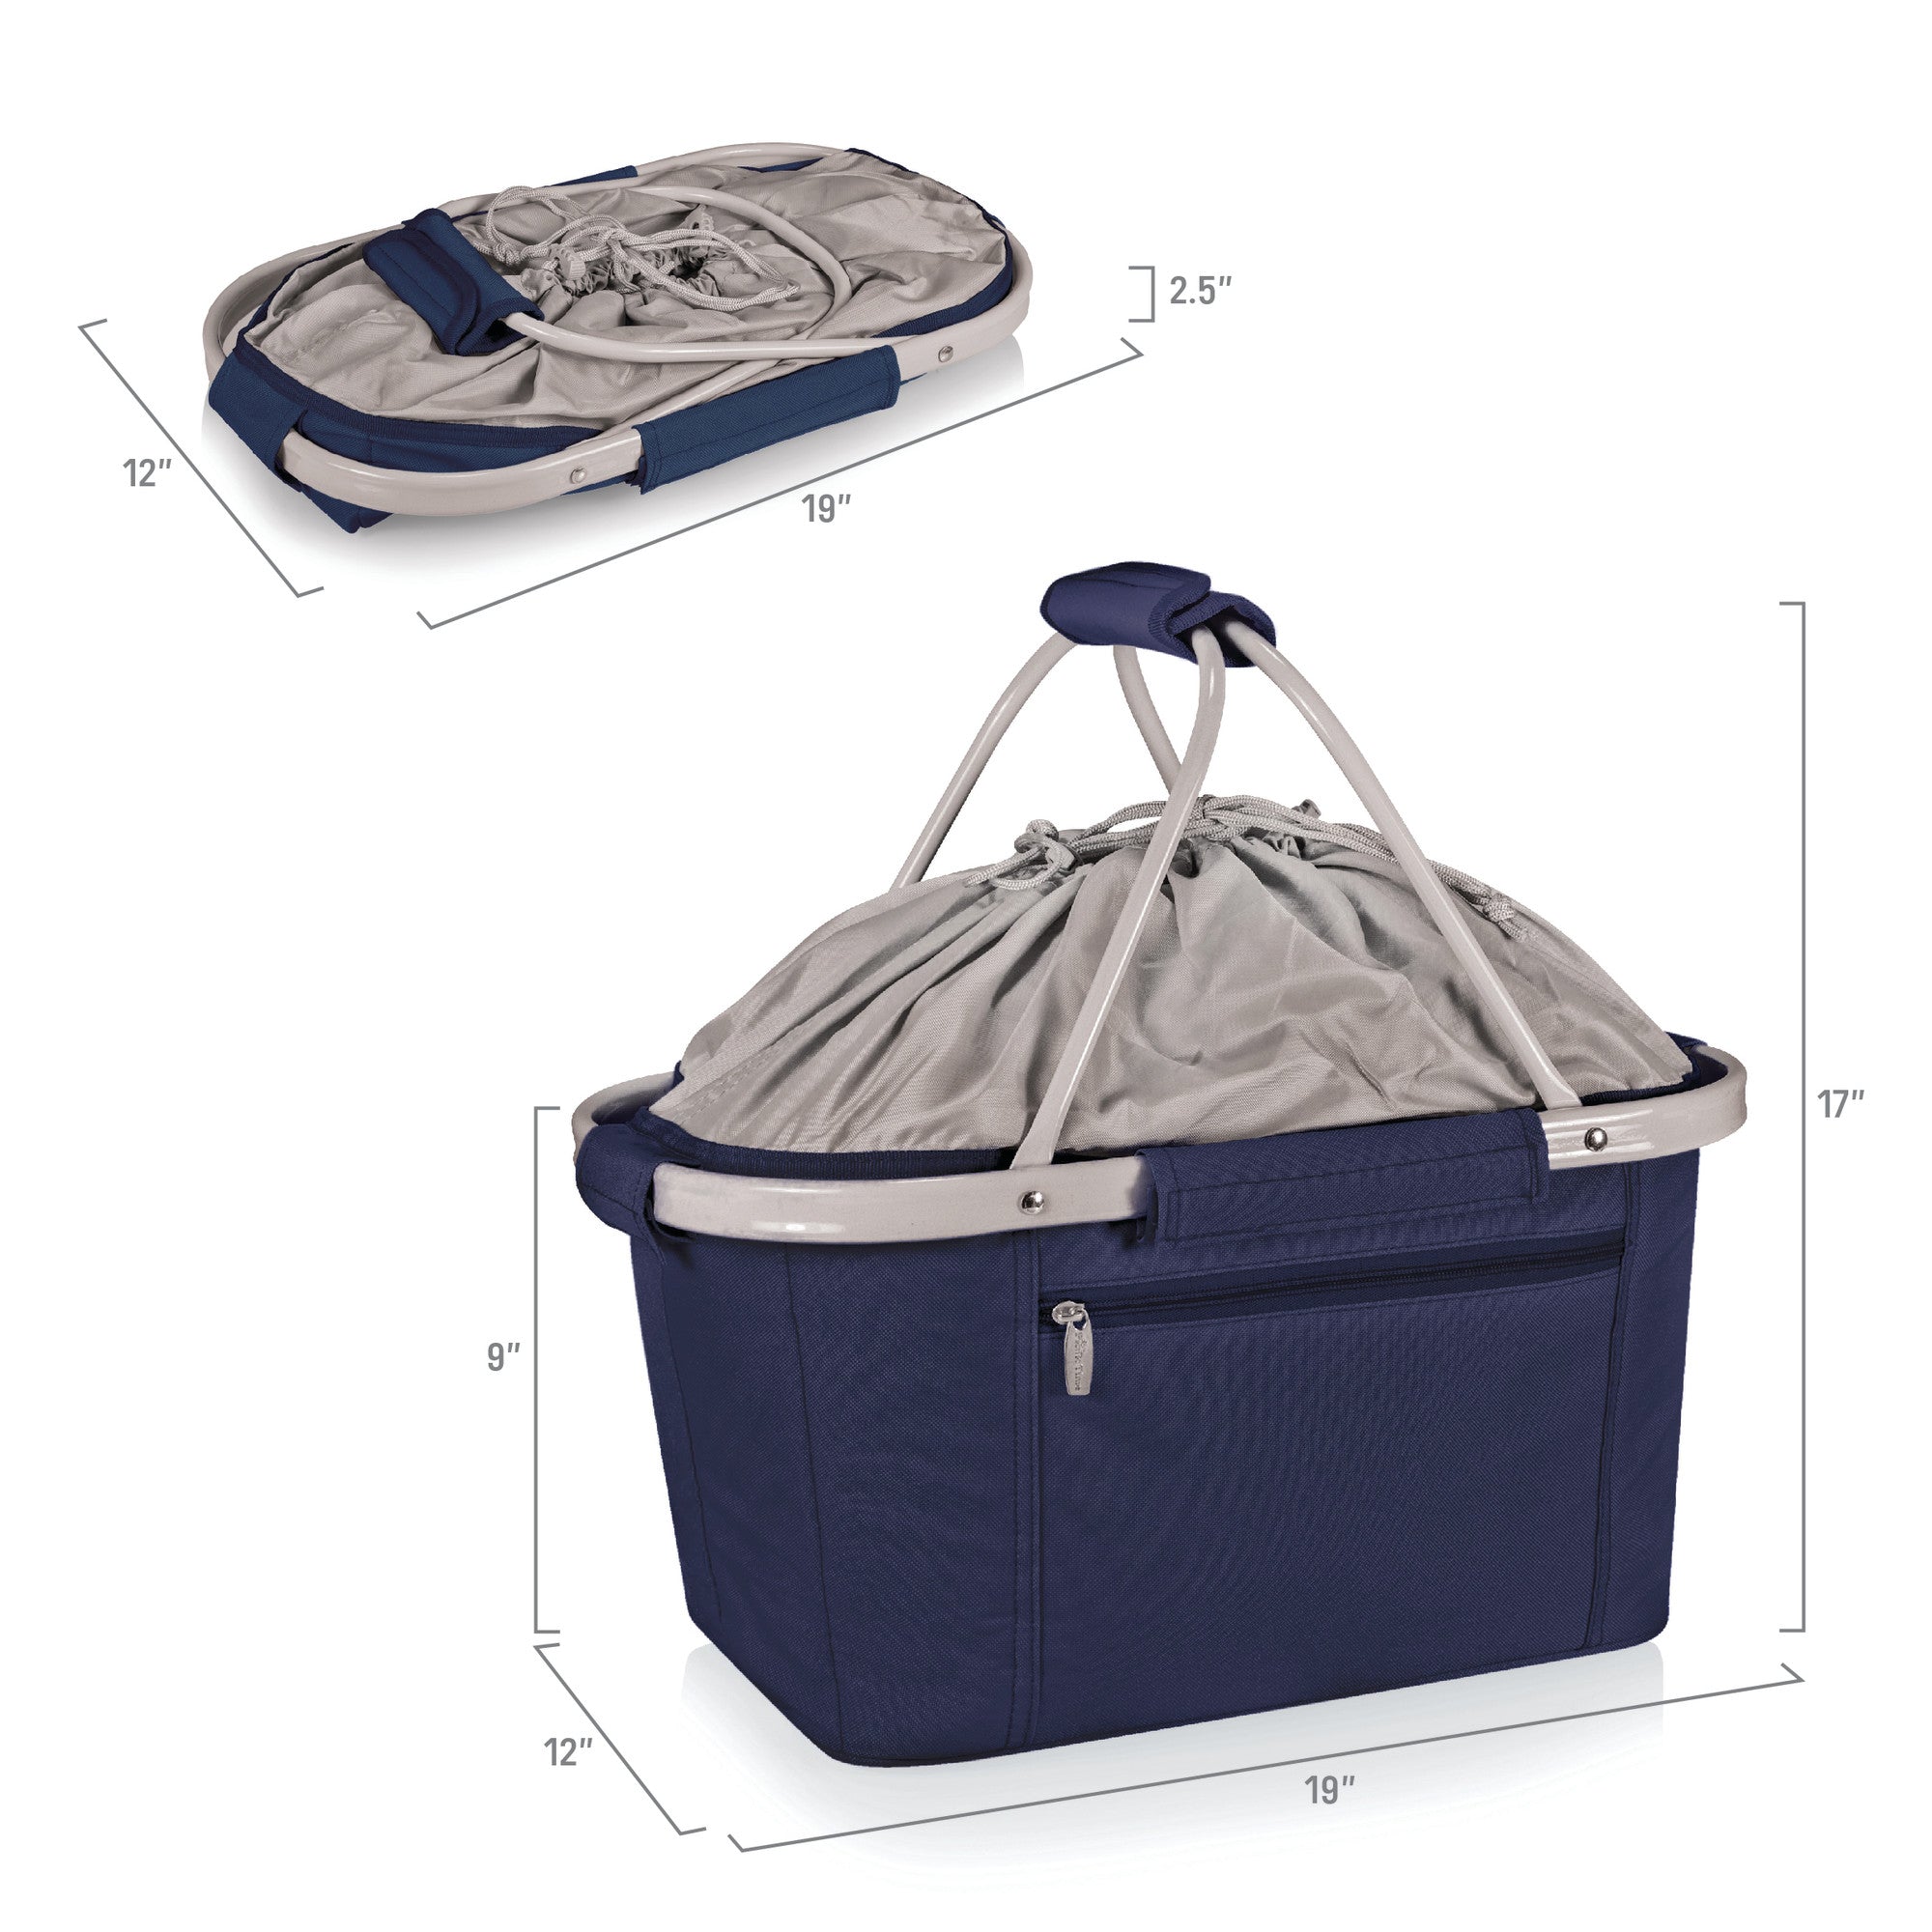 Beauty & the Beast - Metro Basket Collapsible Cooler Tote